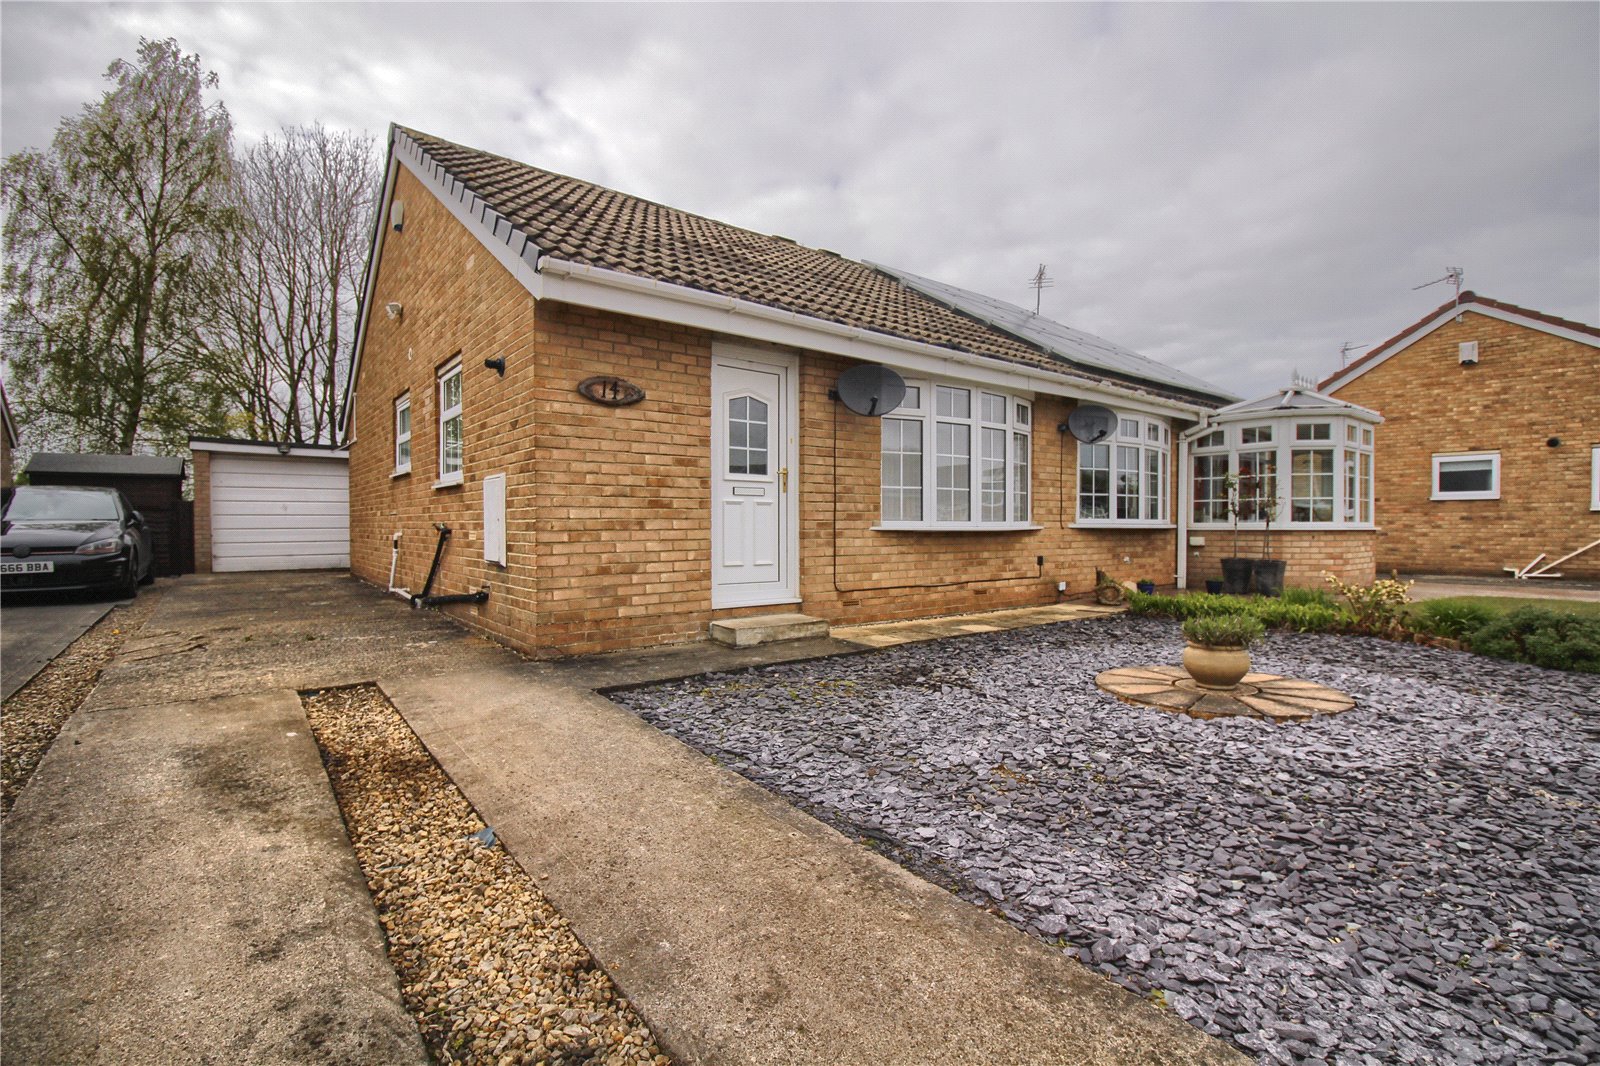 2 bed bungalow to rent in Kennthorpe, Nunthorpe 1